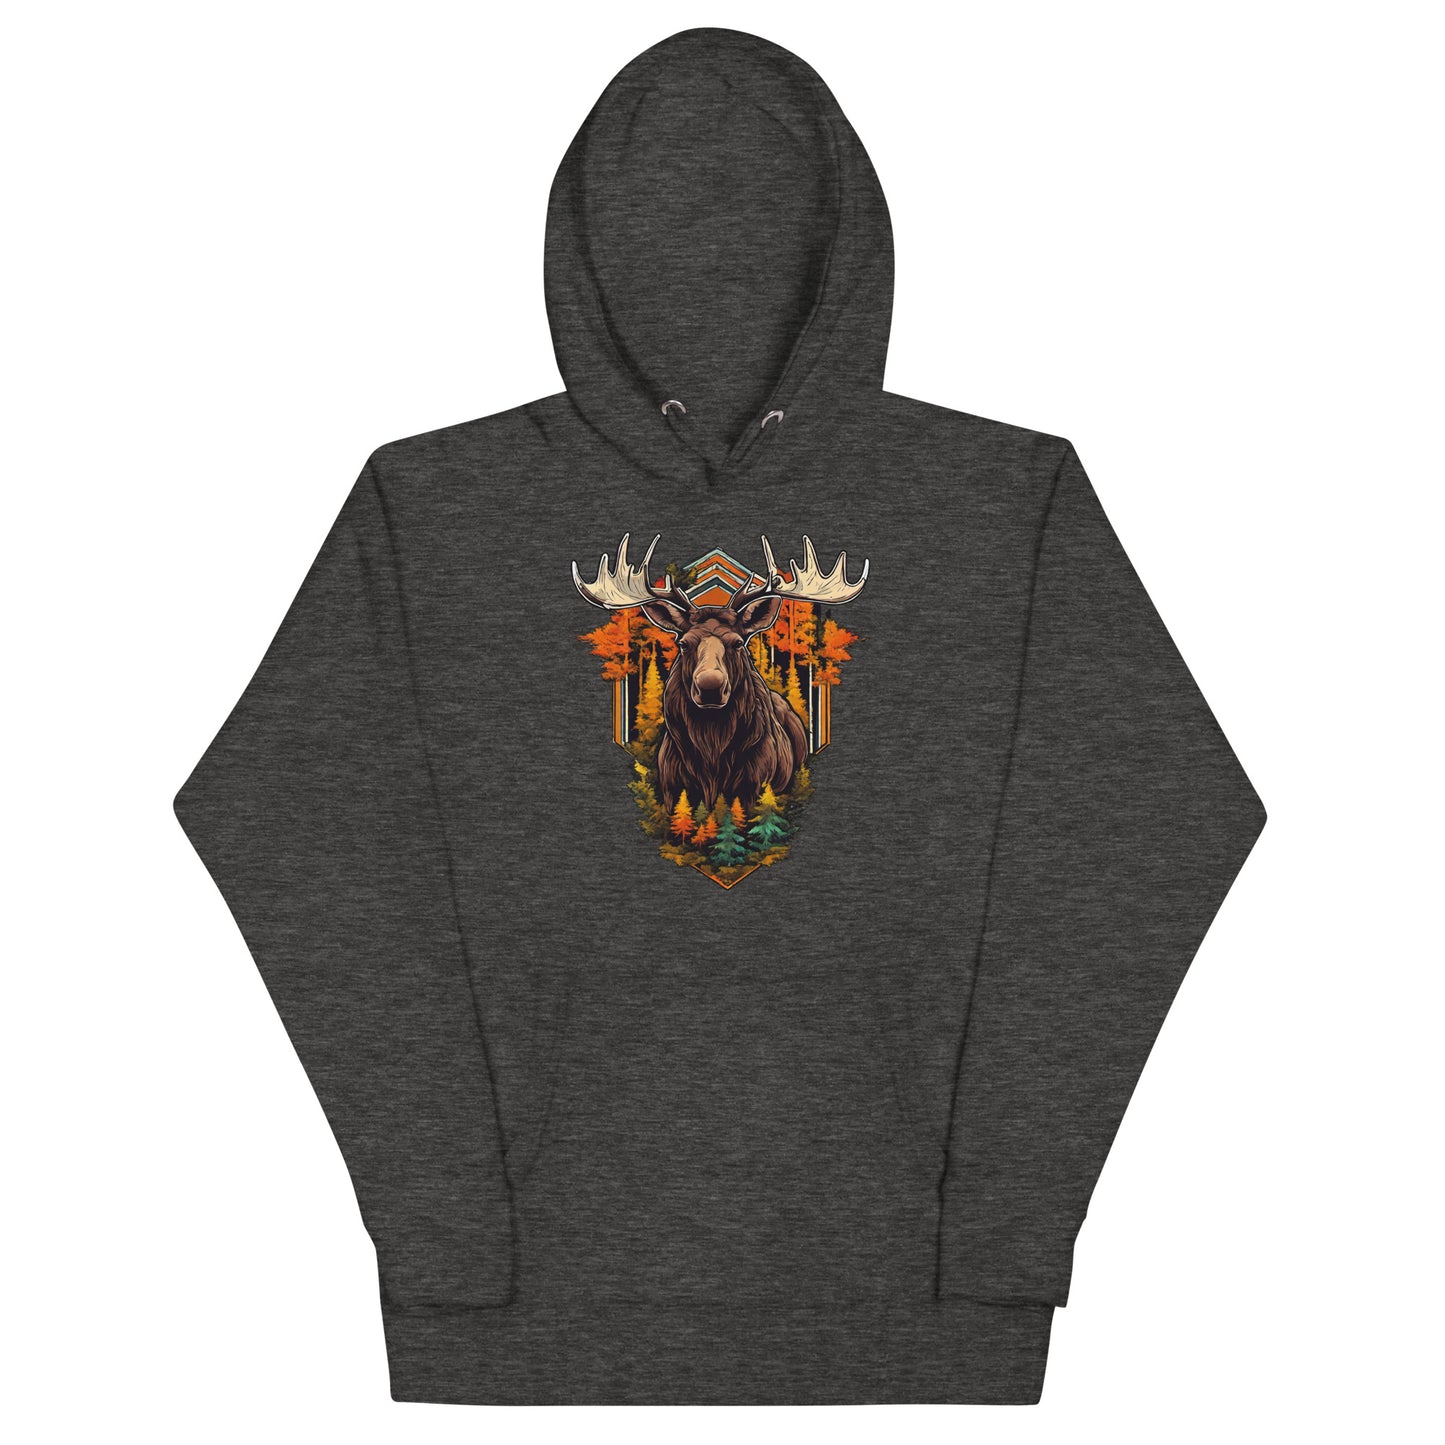 Moose & Forest Emblem Hoodie Charcoal Heather